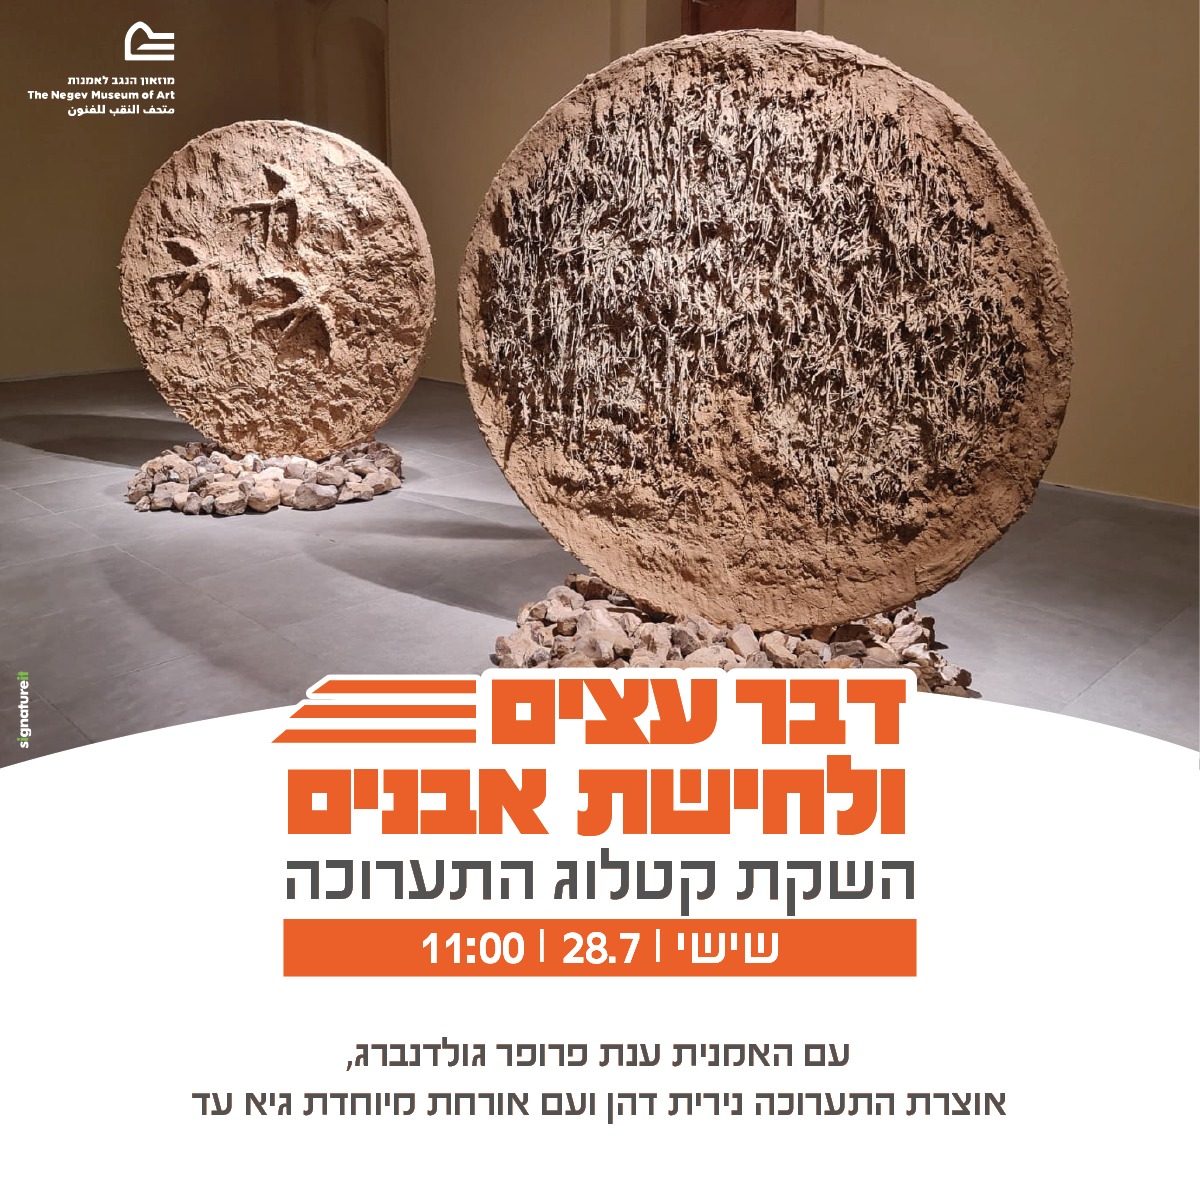 Solo exhibition at The Negev Museum of Art